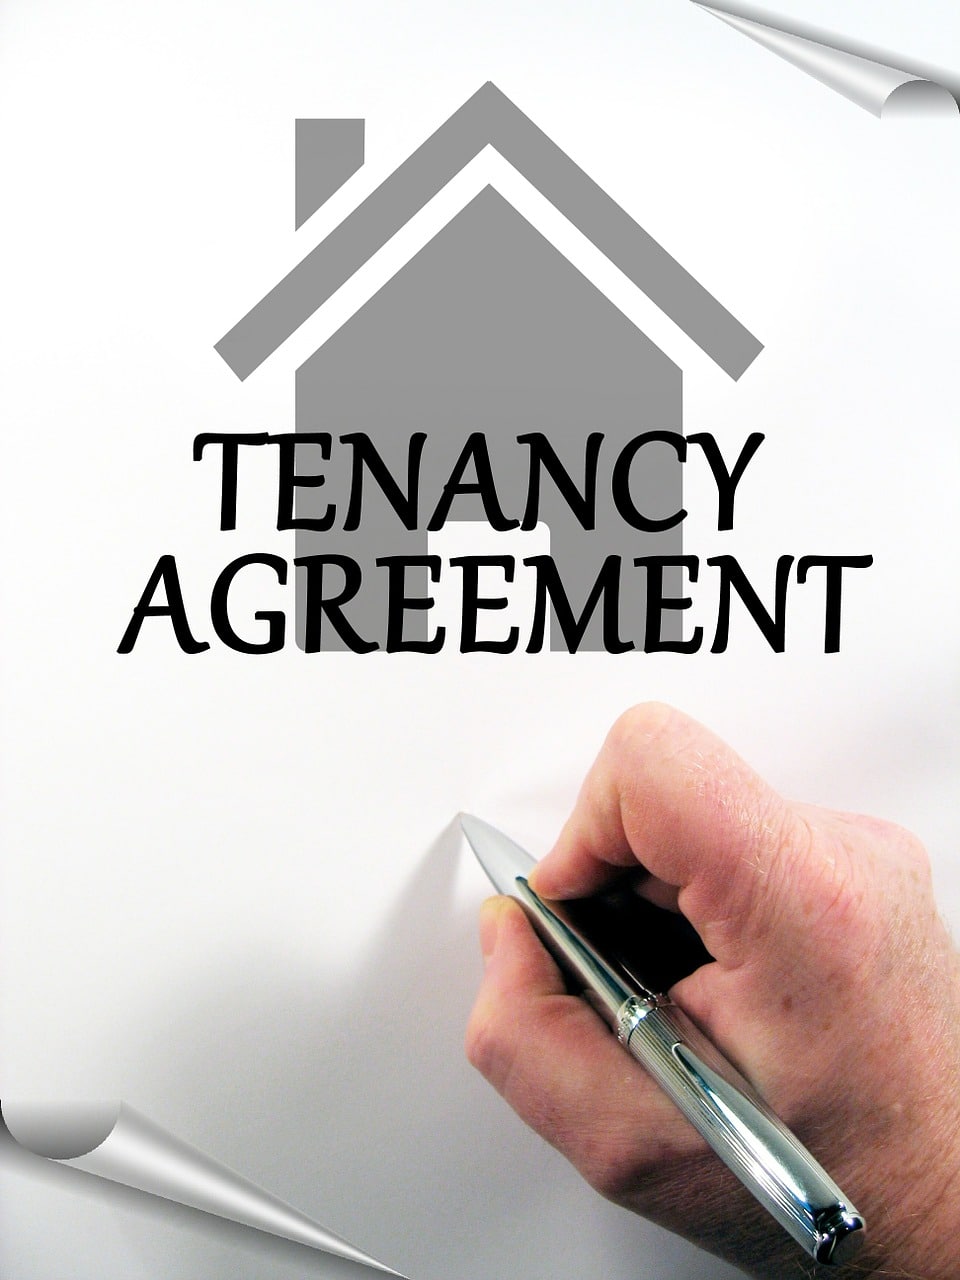 The Tenancy Agreement and its Essentials